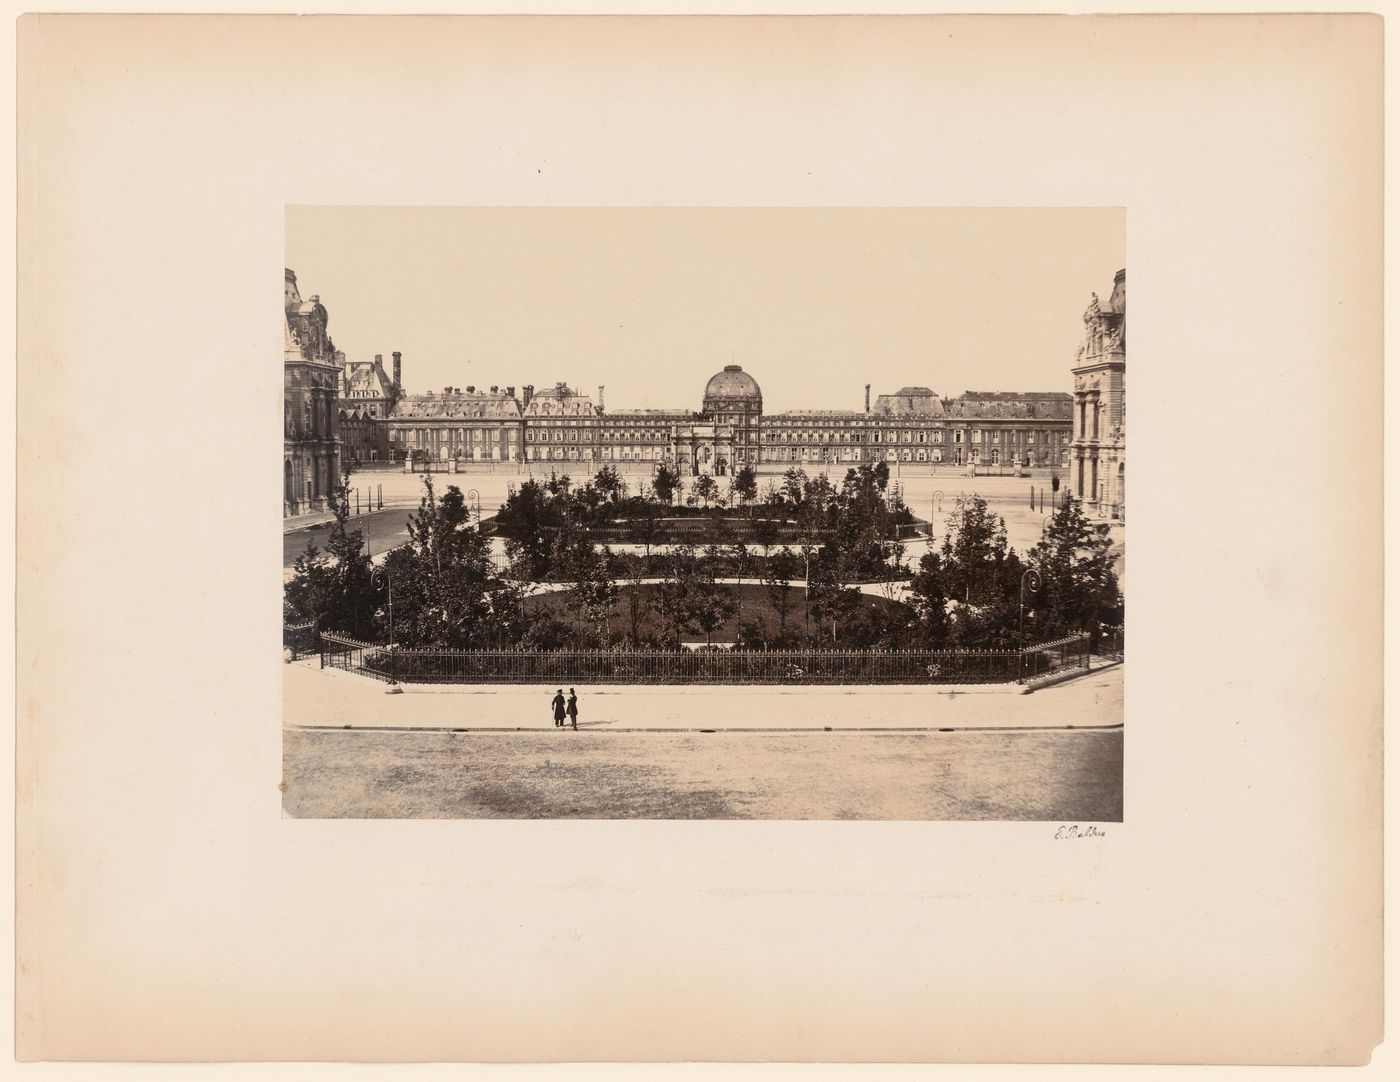 General view of the Tuileries and gardens, Paris, France